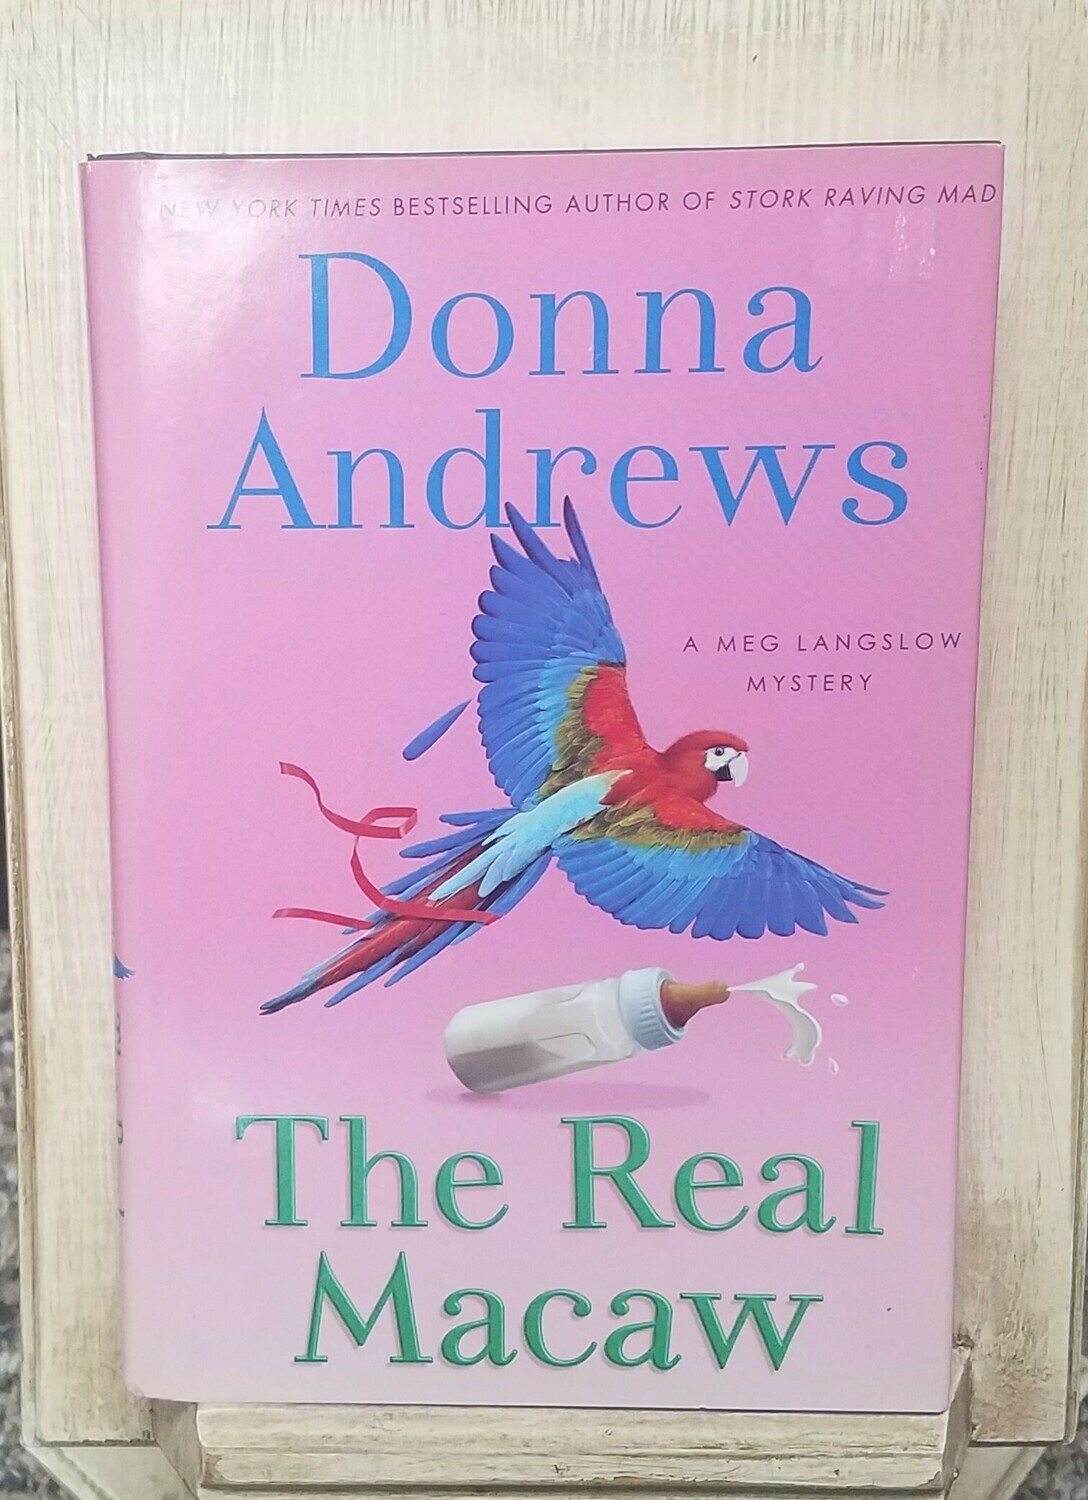 The Real Macaw by Donna Andrews